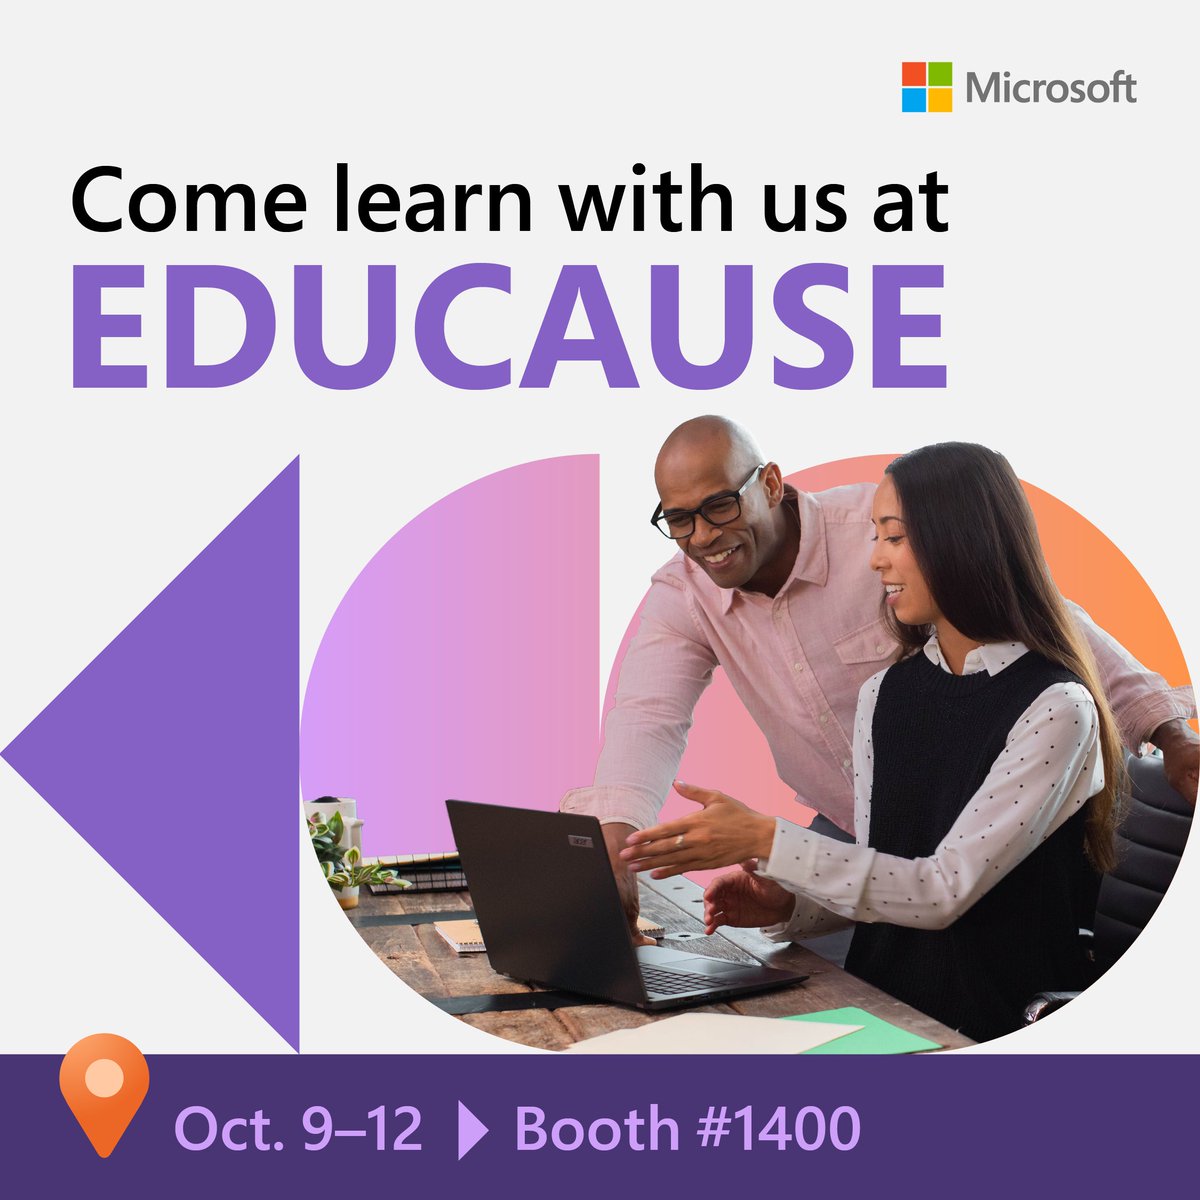 It's time for @EDUCAUSE! Stop by booth 1400 to grab a coffee and connect with Microsoft experts. msft.it/60169SomK #HigherEd